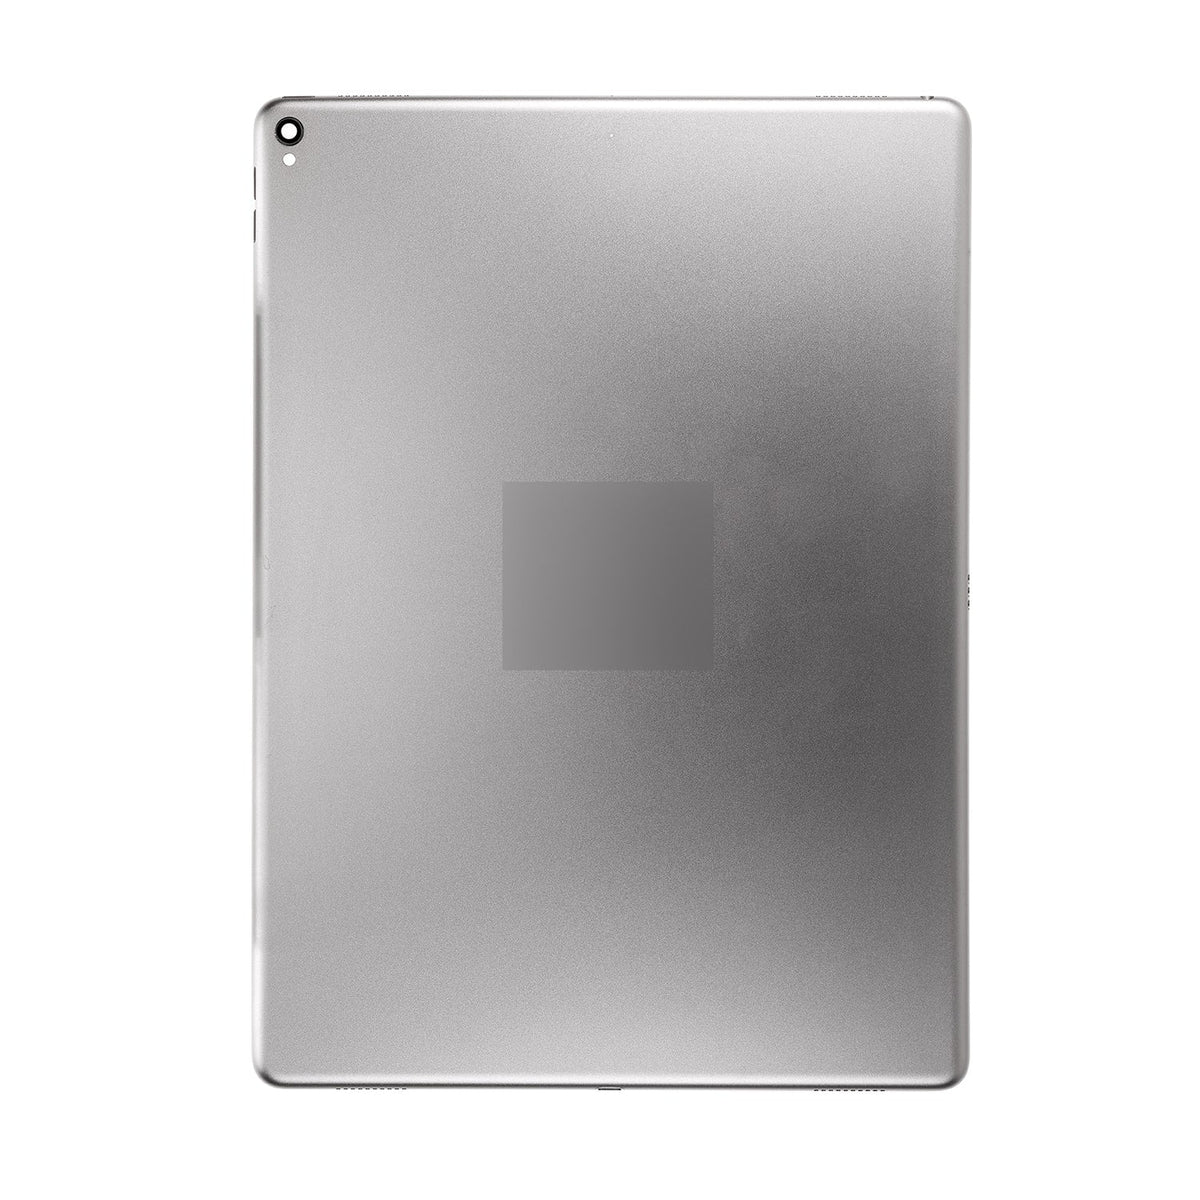 BACK COVER WIFI VERSION FOR IPAD PRO 12.9 2ND GEN- GREY